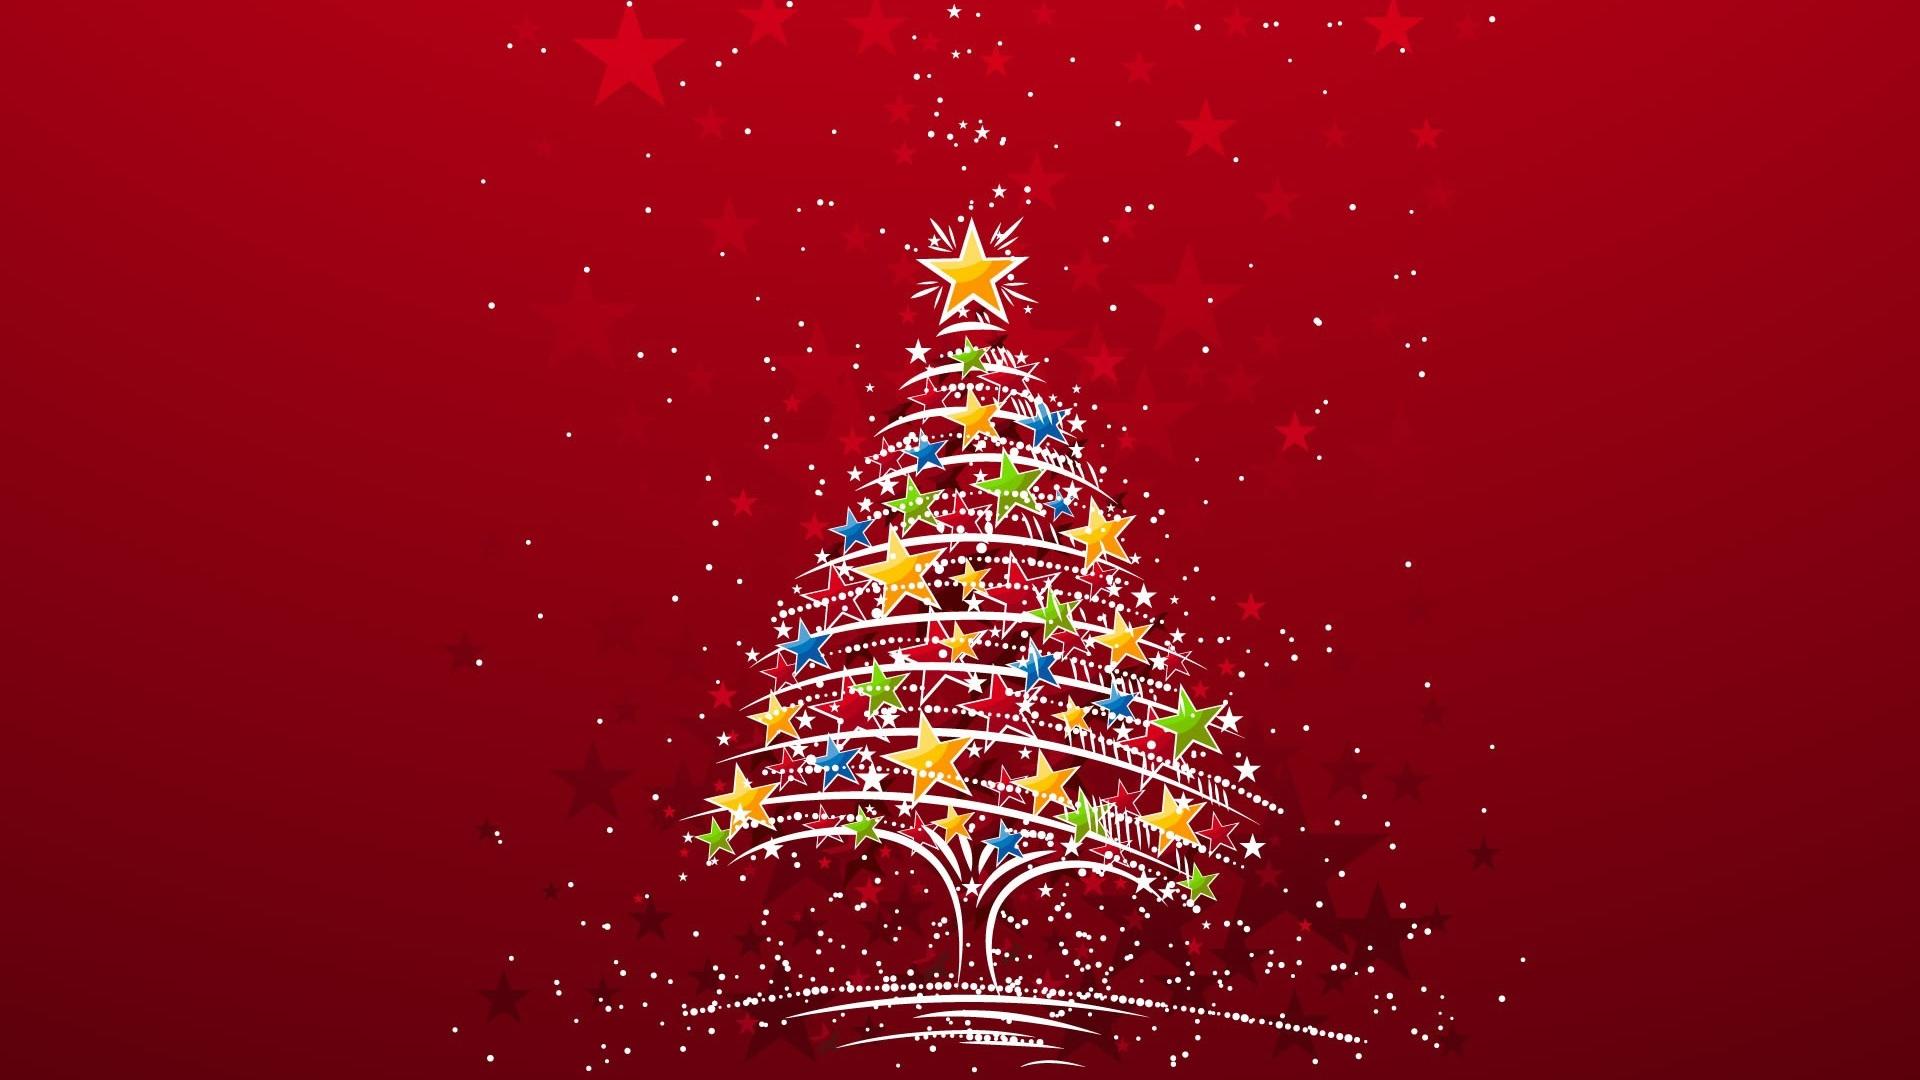 Abstract Christmas Tree Wallpaper Free Abstract Christmas Tree Background